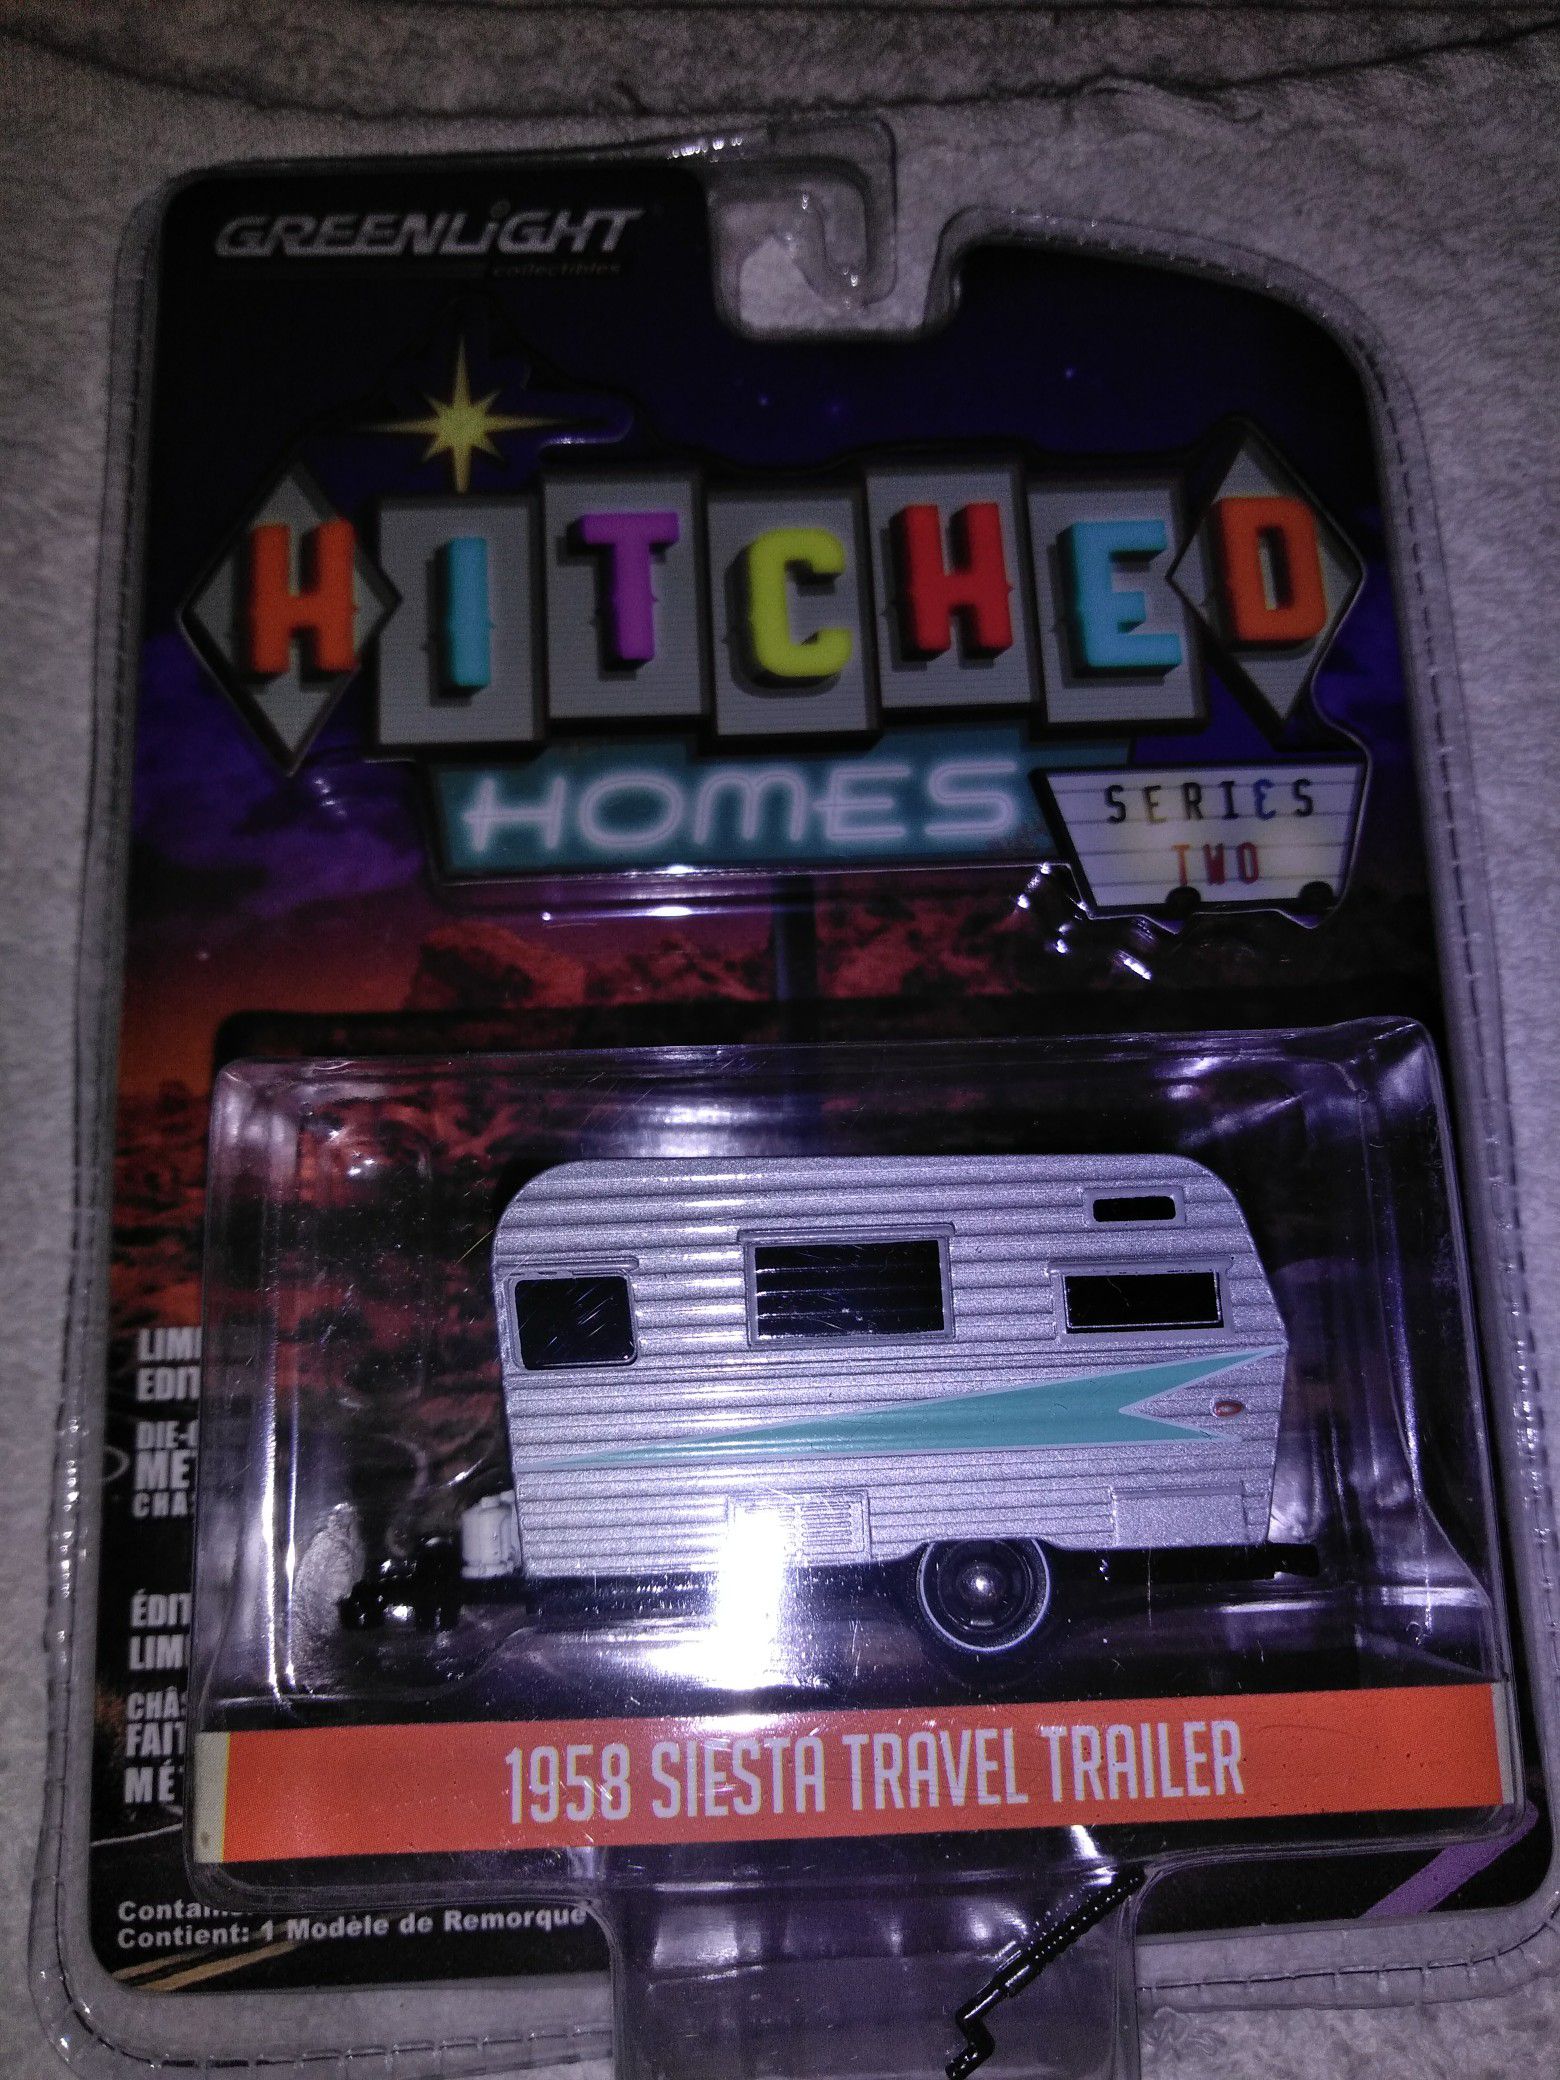 Greenlight hitched homes 58 siesta travel trailer